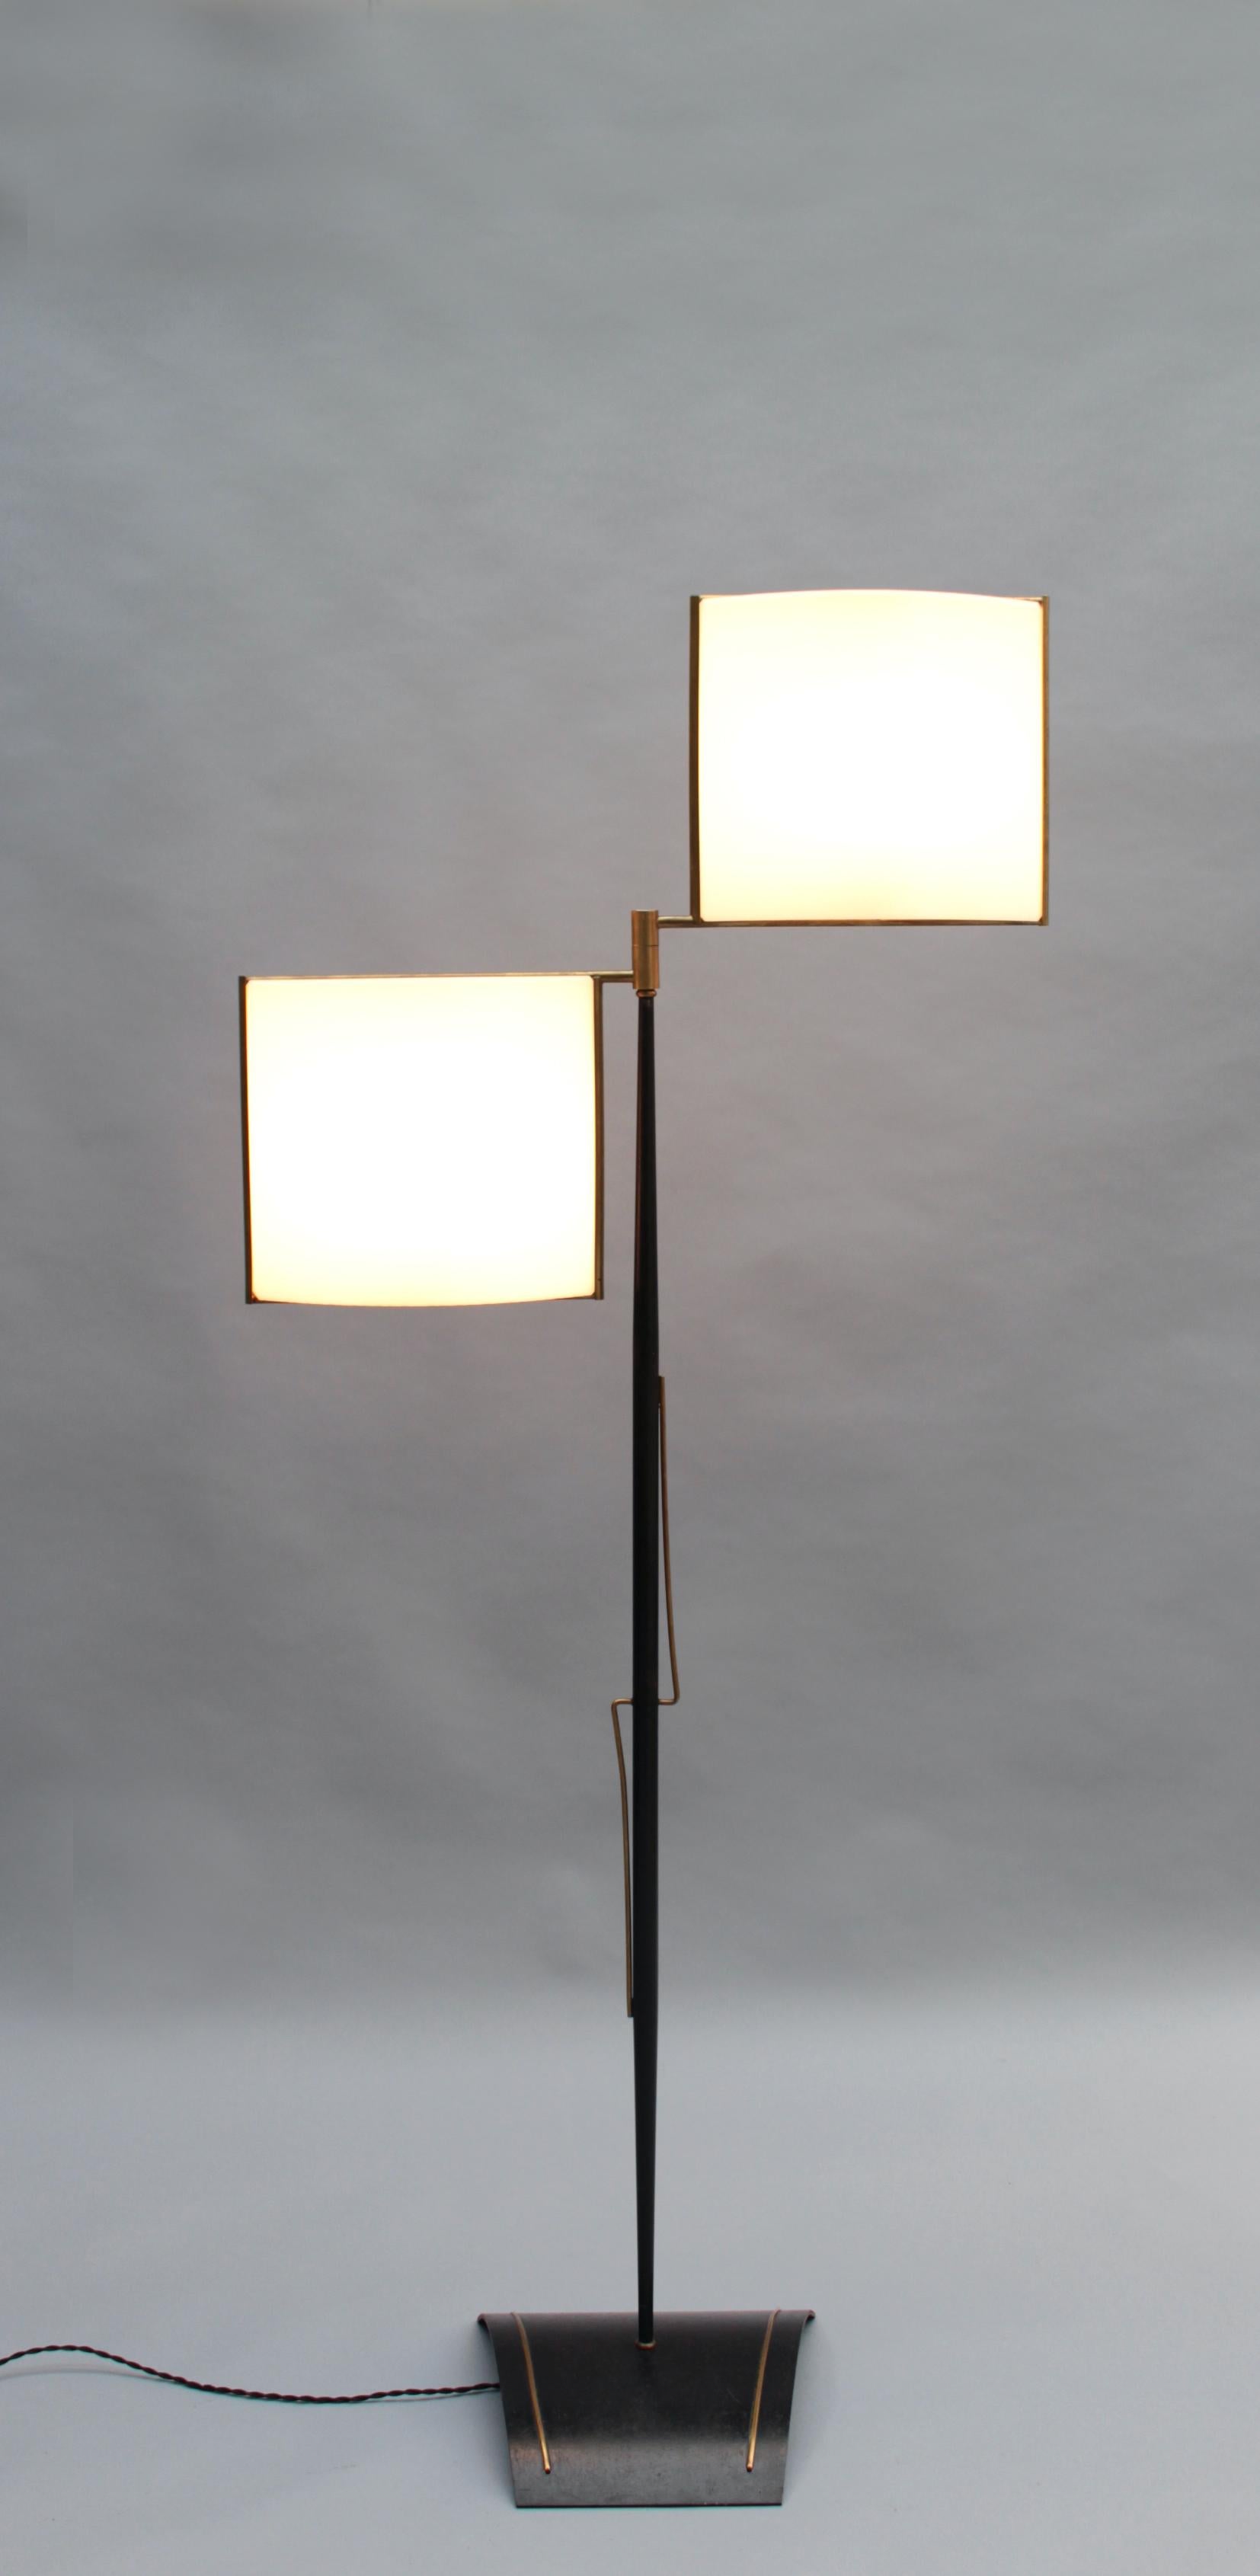 A fine French Mid-Century floor lamp by Lunel with a black lacquered and brass frame that supports two original Perspex shades.

